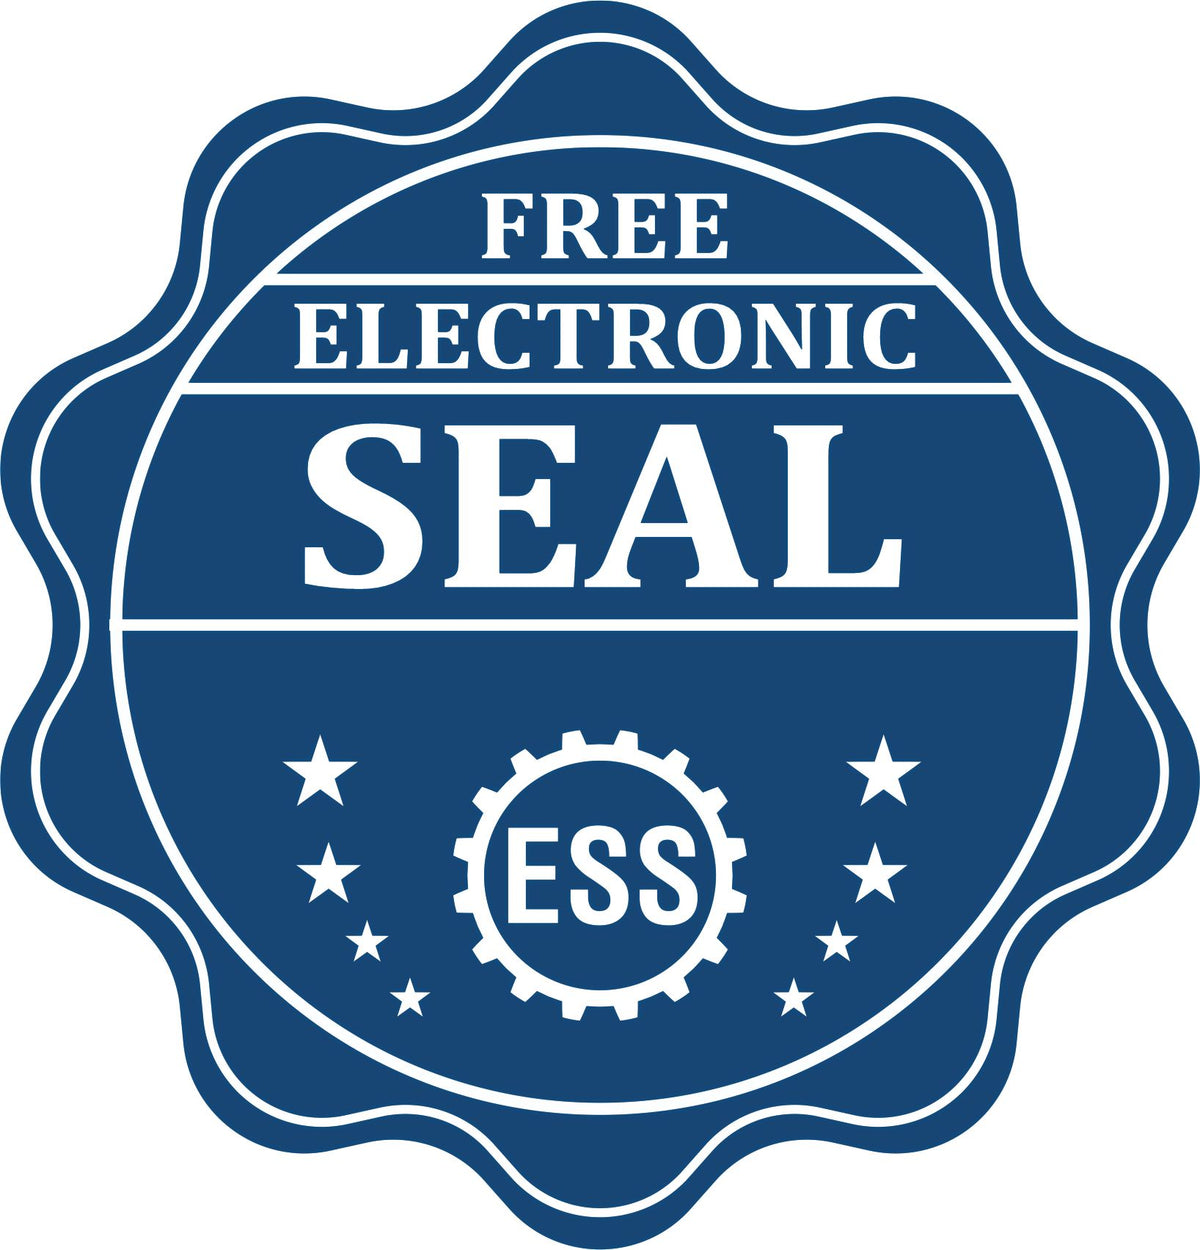 A badge showing a free electronic seal for the Long Reach Florida Geology Seal with stars and the ESS gear on the emblem.